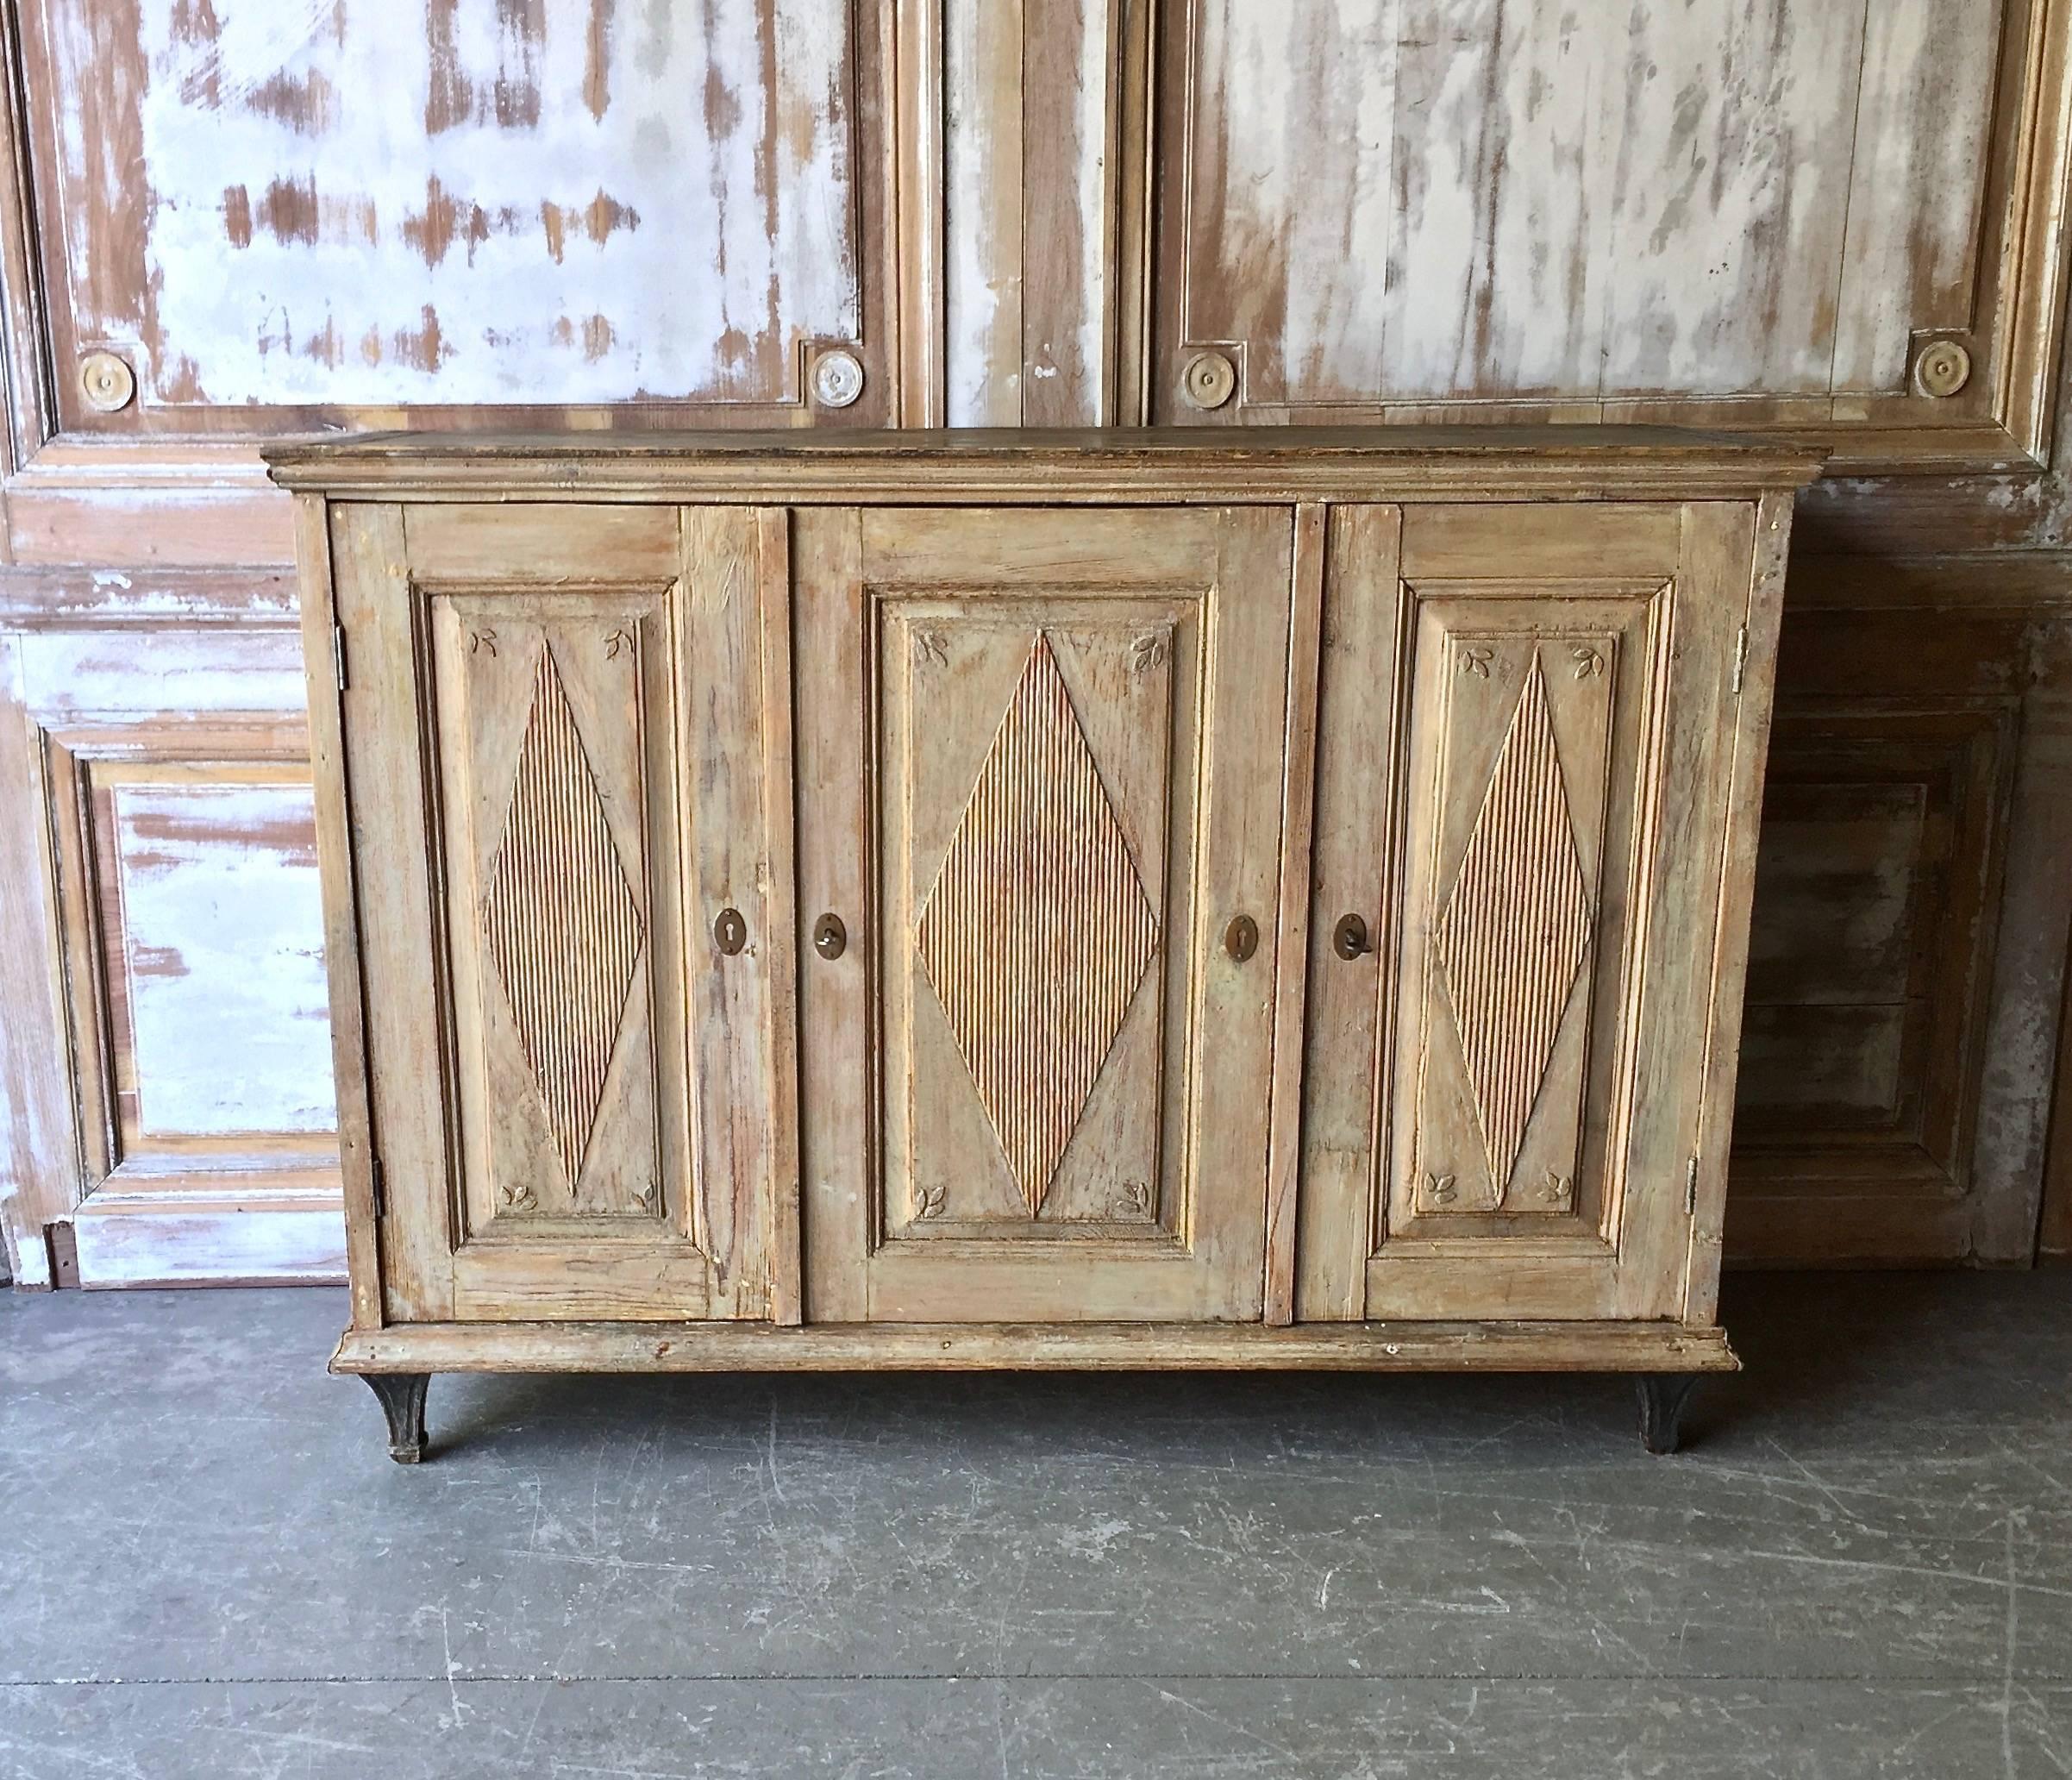 Early 19th century Swedish Gustavian sideboard in Classic Gustavian style with reeded three panelled doors with diamond shaped lozenges and charming carved flower petal decors, on tapered feet. Scraped to its original color with hint of palest blue